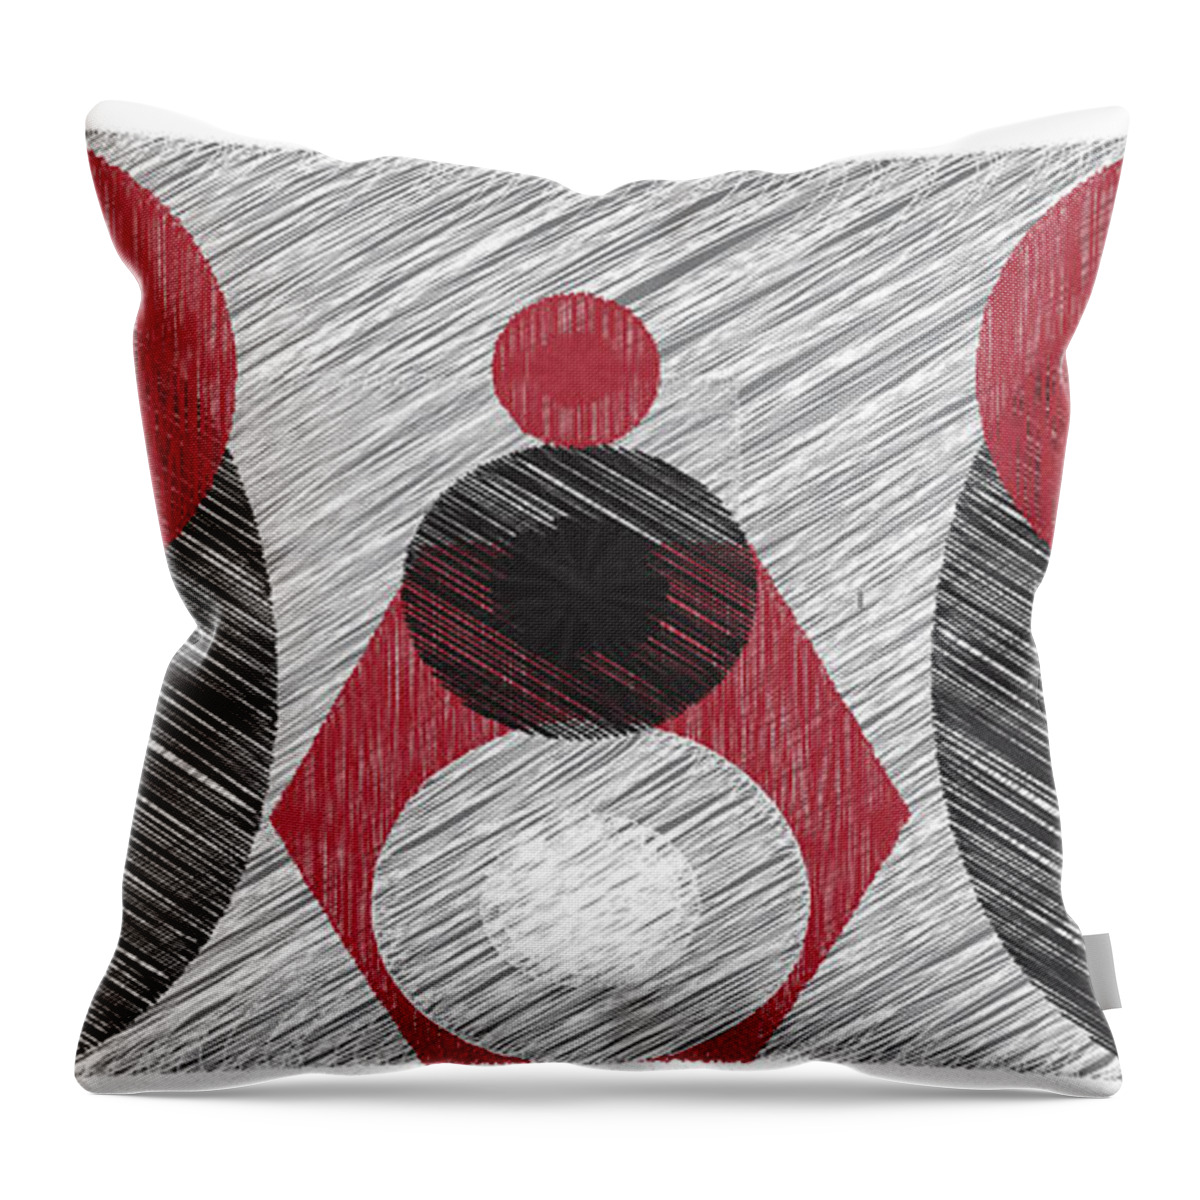 Abstract Throw Pillow featuring the painting The Family by Christina Wedberg